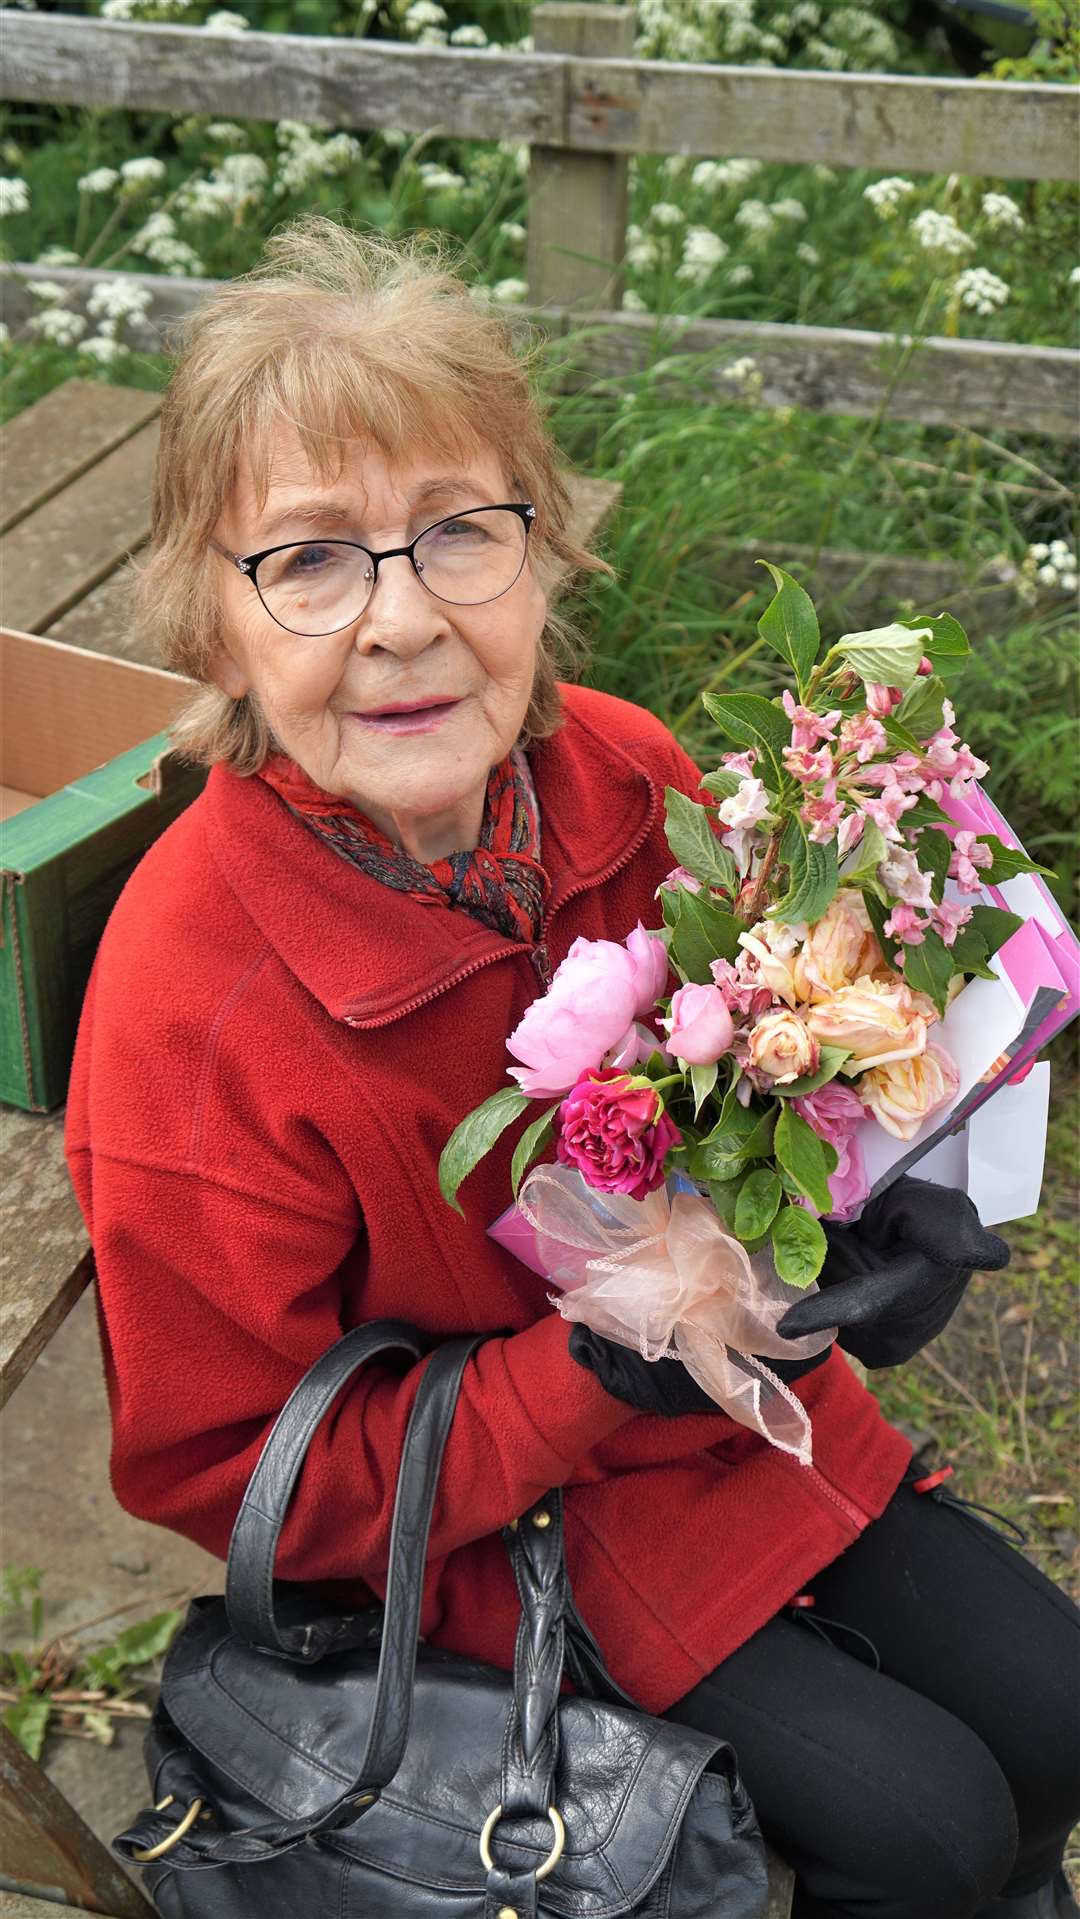 Marjory Scott told the children about rural life at her home near Lybster in the 1930s and 40s. She was presented with a flower bouquet by the children after the event. Picture: DGS